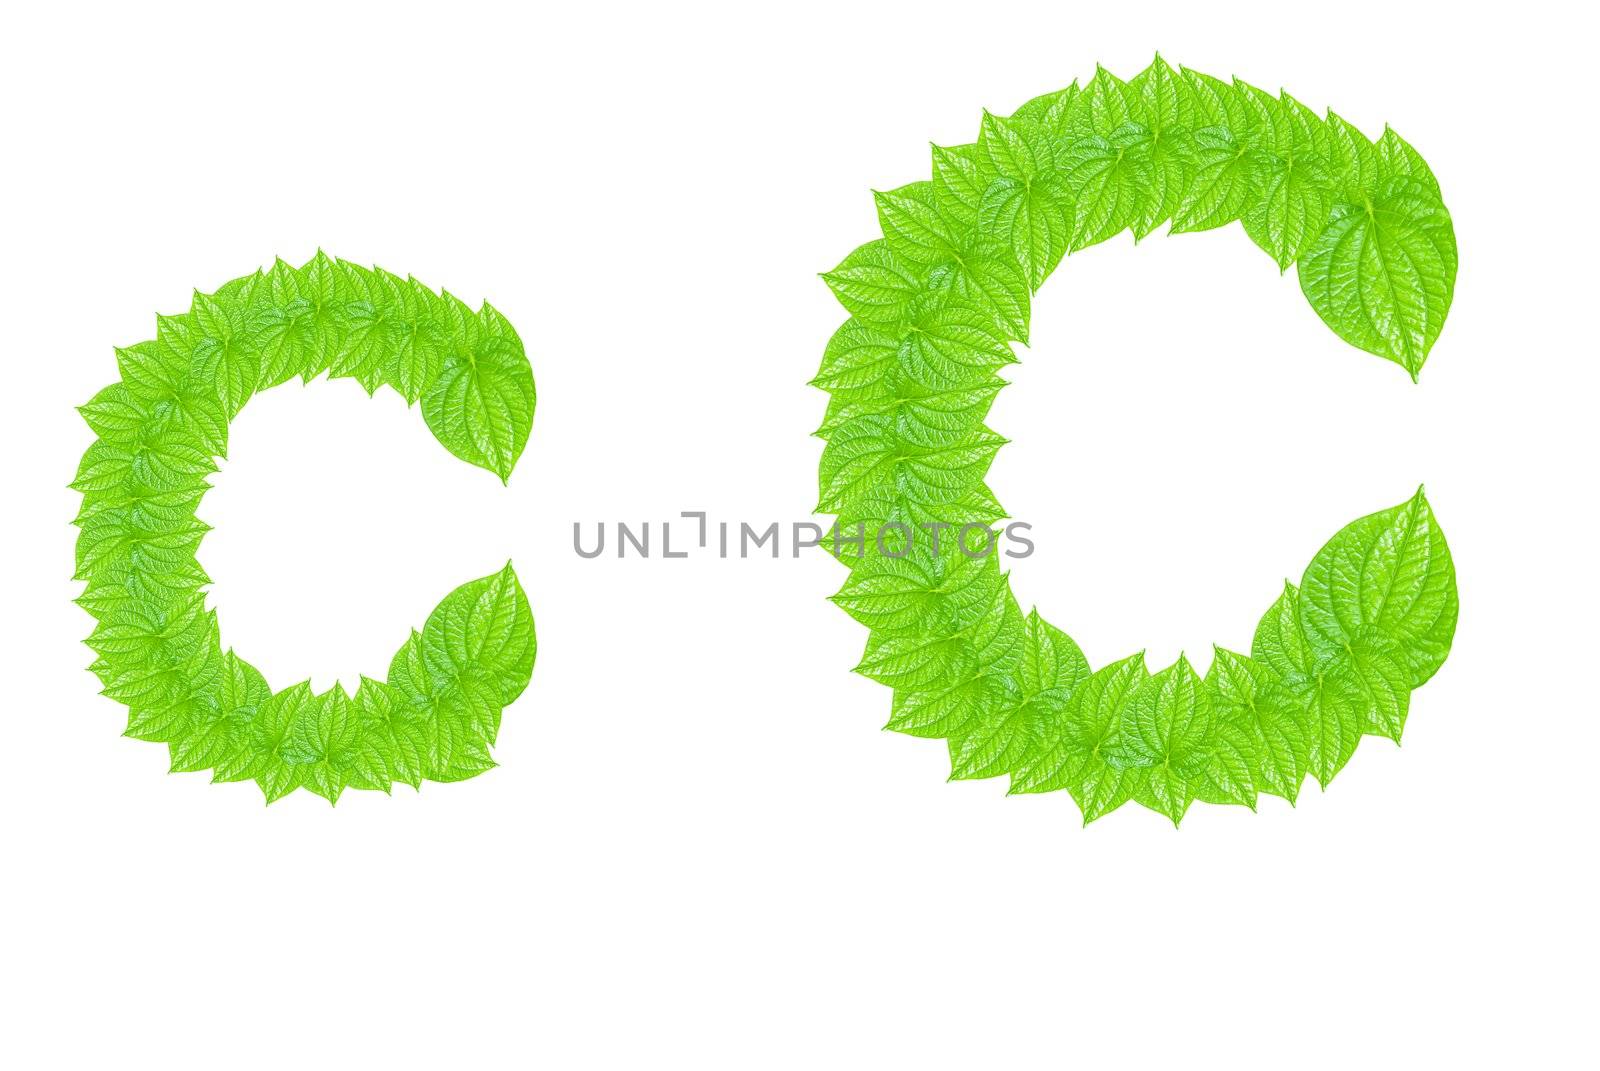 English alphabet made from green leafs with letter C in small capital and large capital letter